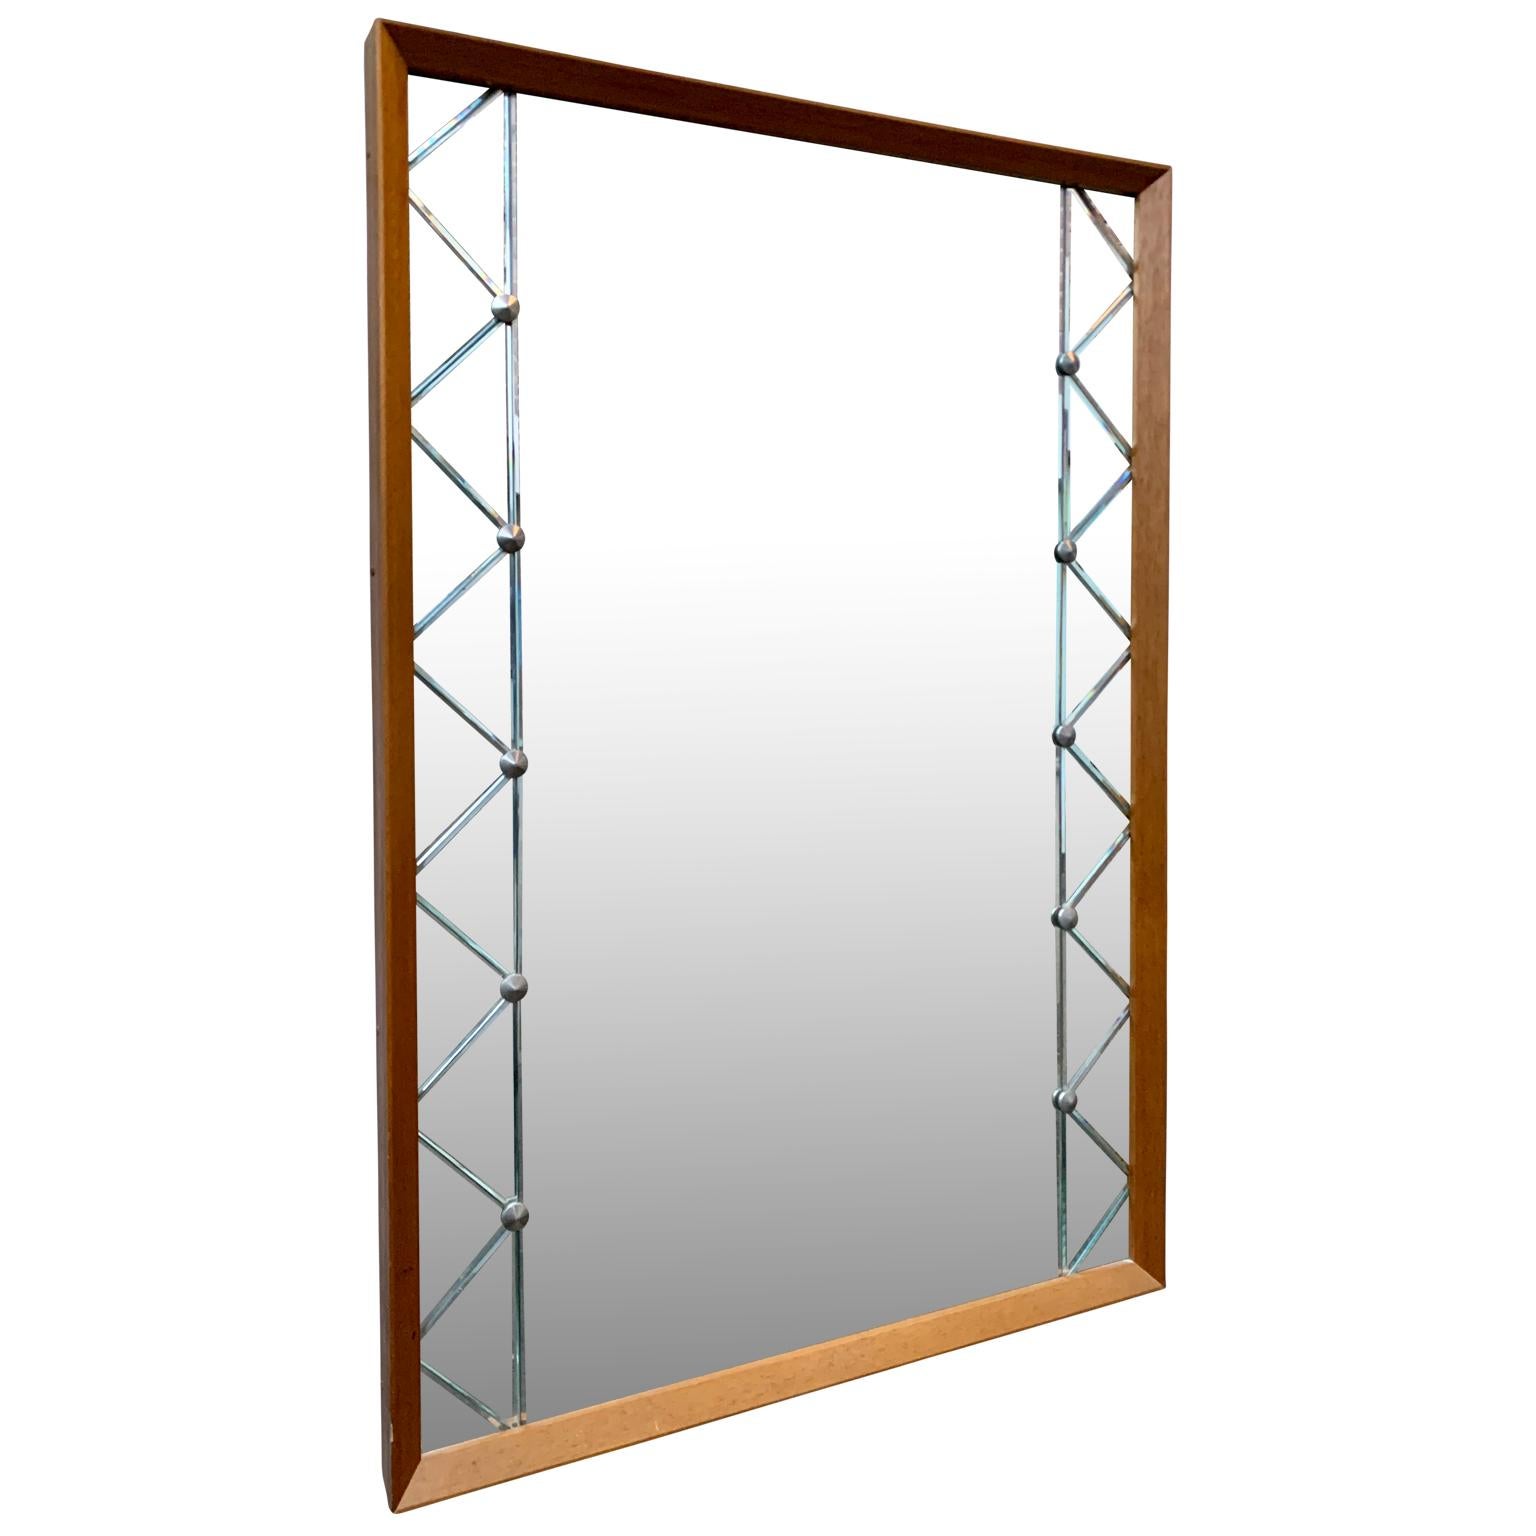 A vintage oakwood midcentury rectangular wall mirror.
This Swedish mirror from circa 1950s-1960s is made by KSG Karlshamn. Central portrait mirror flanked either side by smaller mirrored panels, held in place by stainless screws in studs and